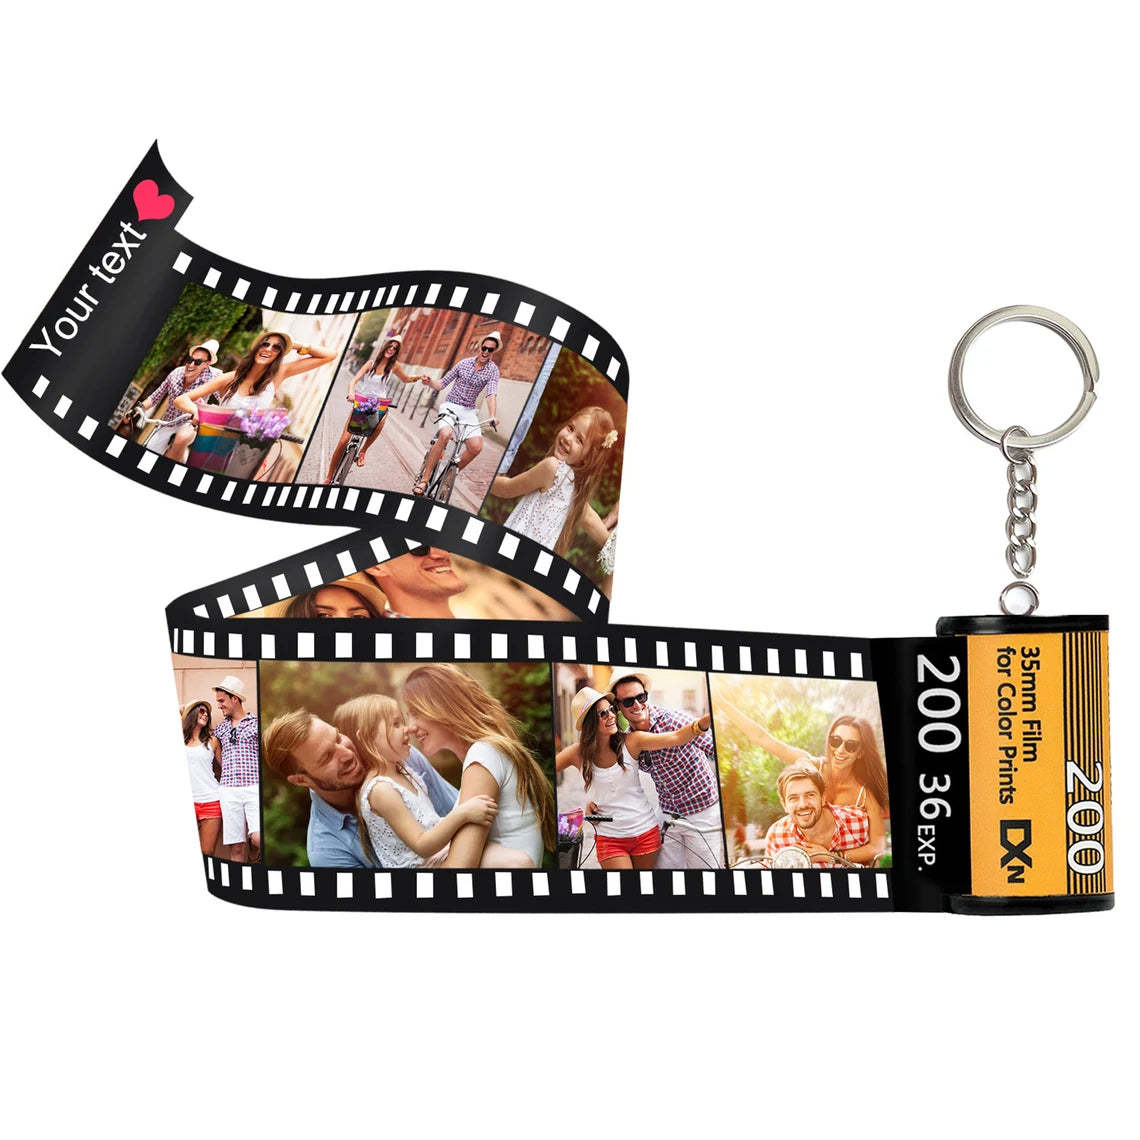 Custom Text For The Film Roll Keychain Personalized Picture Keychain with Reel Album Customized Anniversary Gifts - soufeelmy